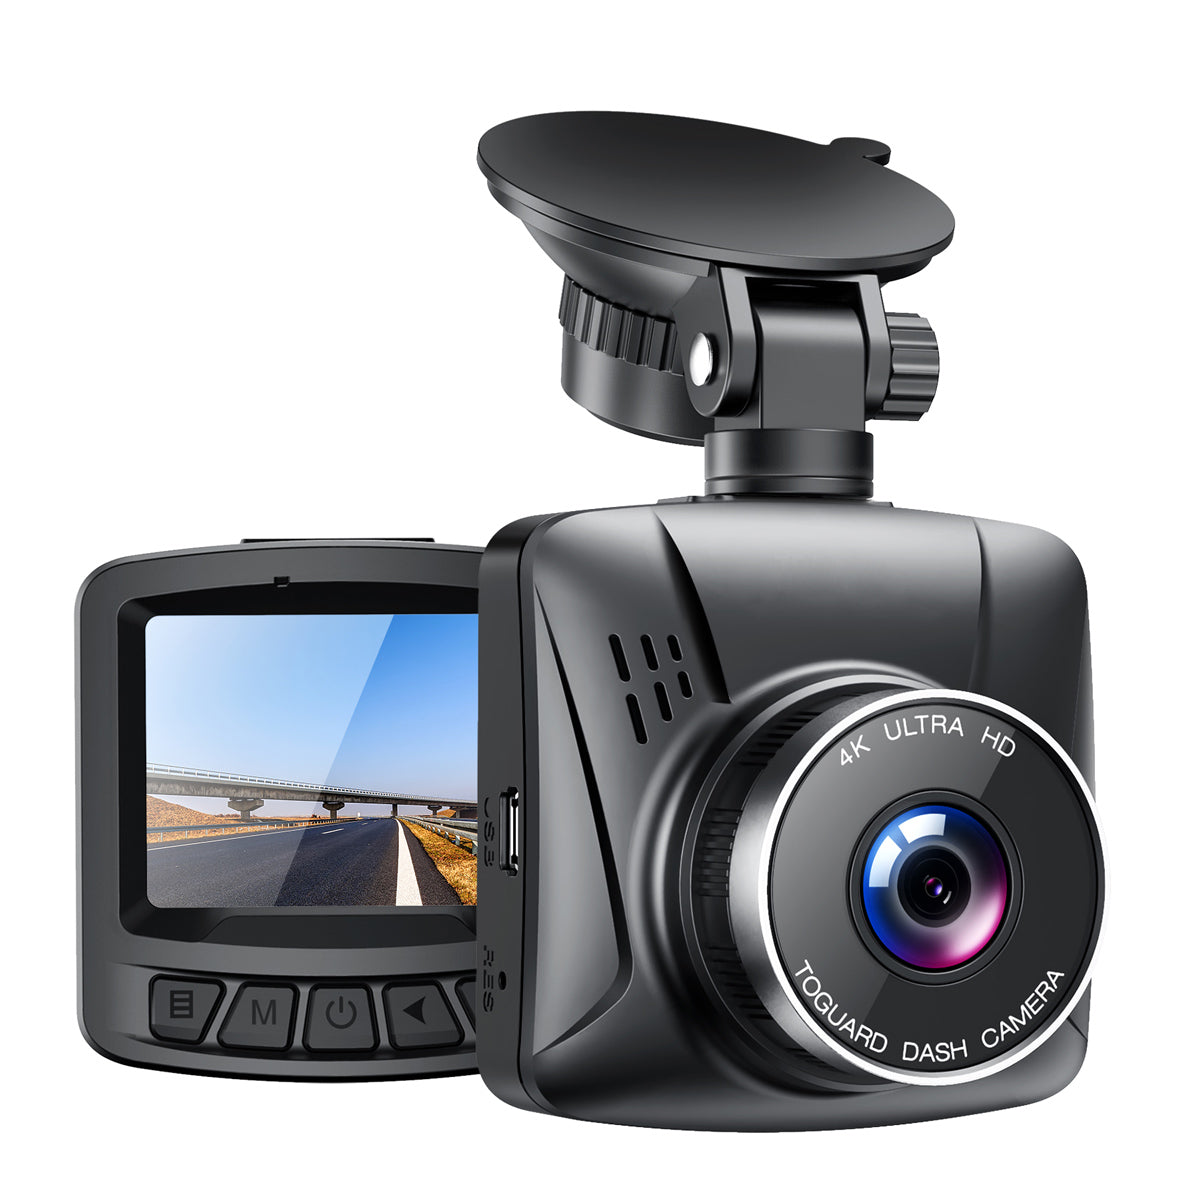 TOGUARD 4K Dash Cam with WiFi GPS, Front and Inside Dual Car Dash